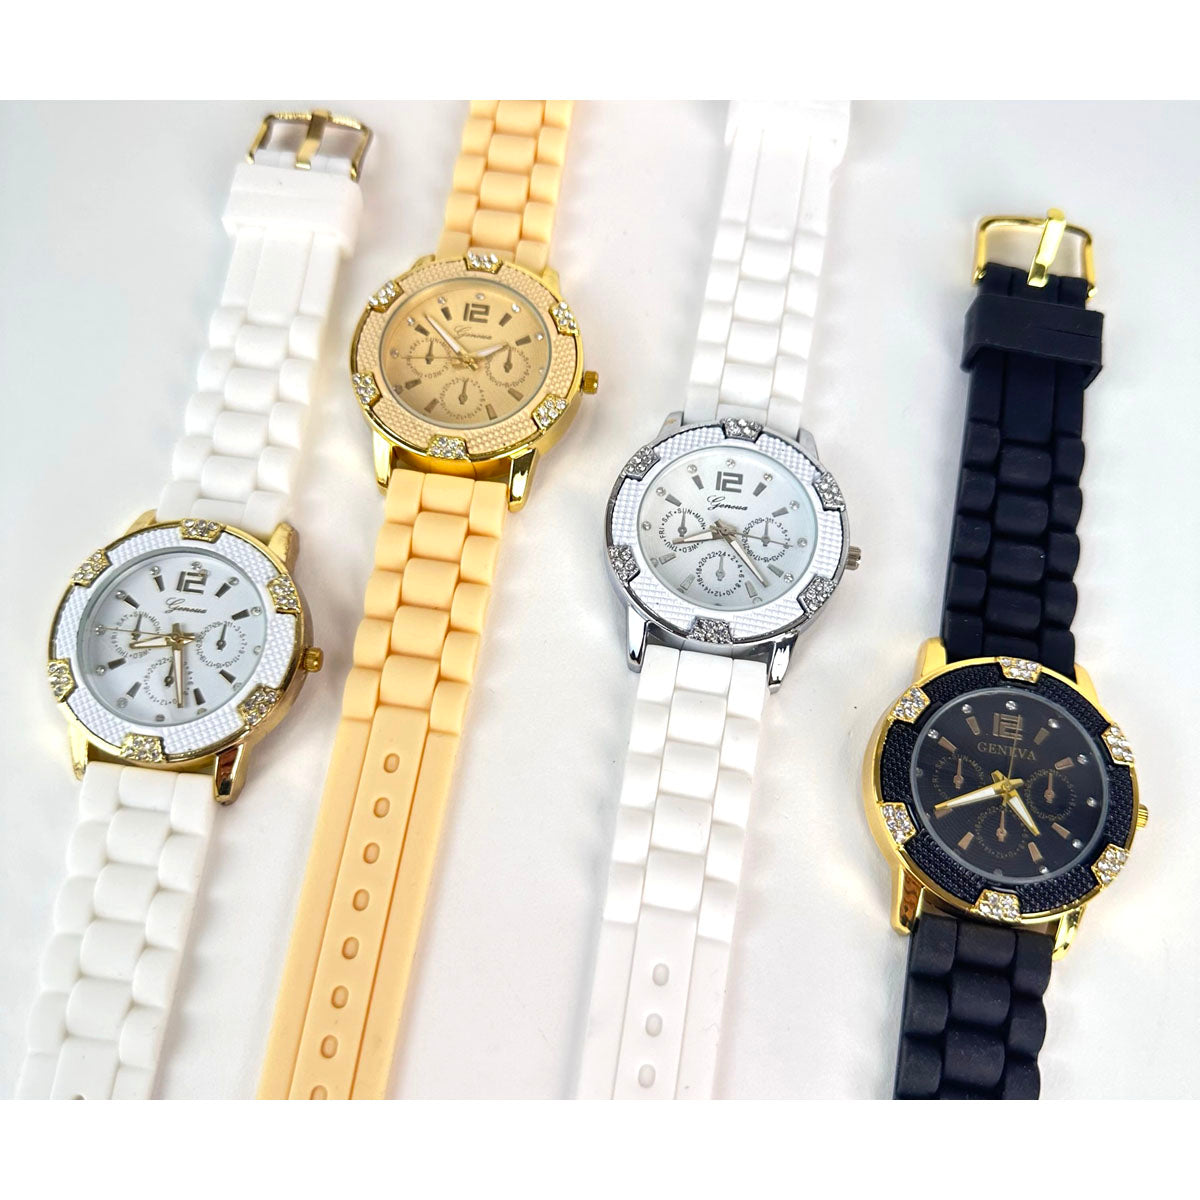 CLEARANCE SALE - Geneva Silicon Band Watch Wholesale 4 Colors Crystal Bezel Watches for Women